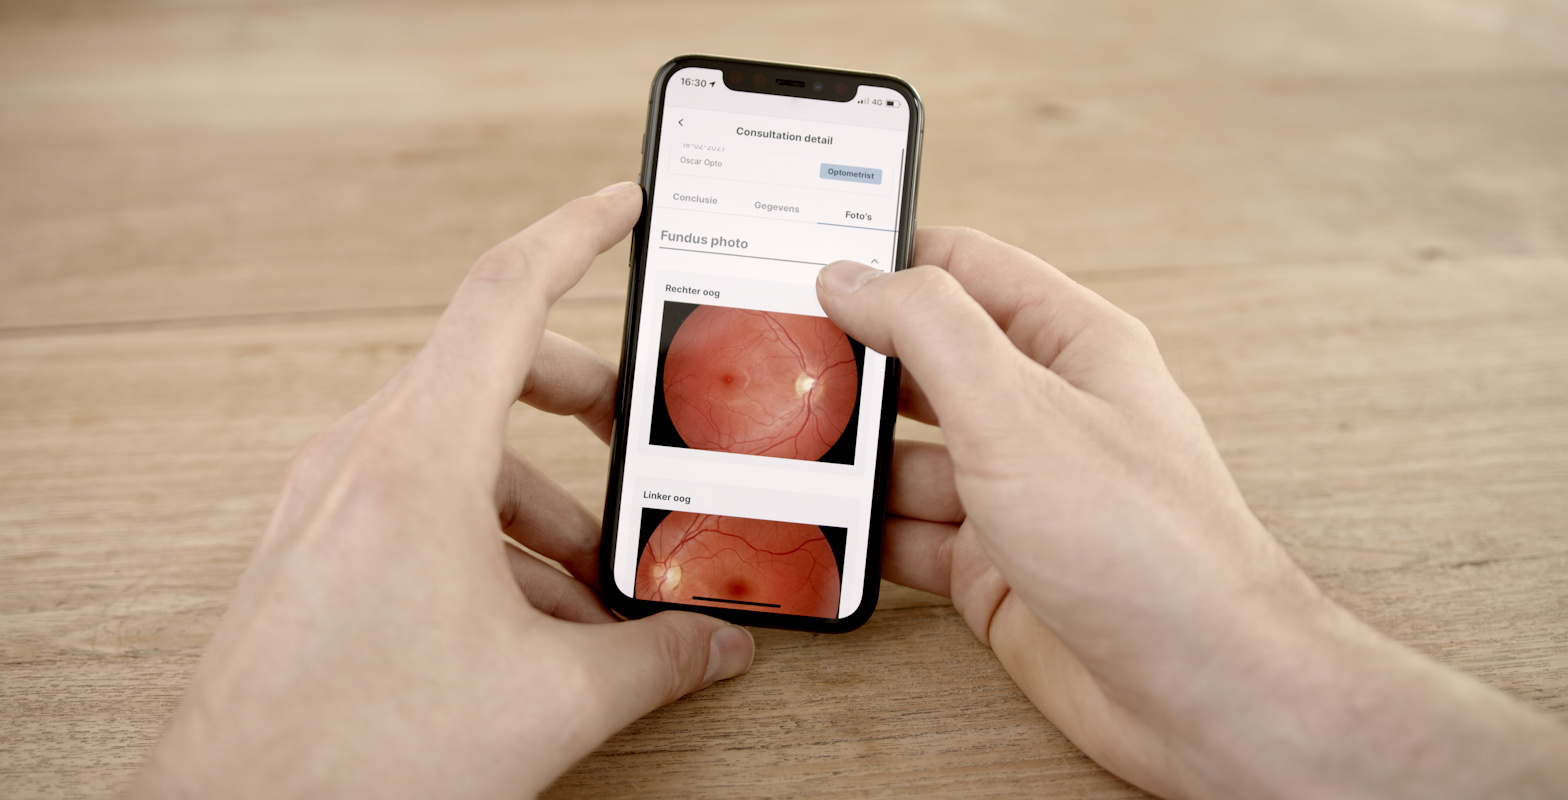 Hands holding an iPhone with the Eyehelp Patient app active.